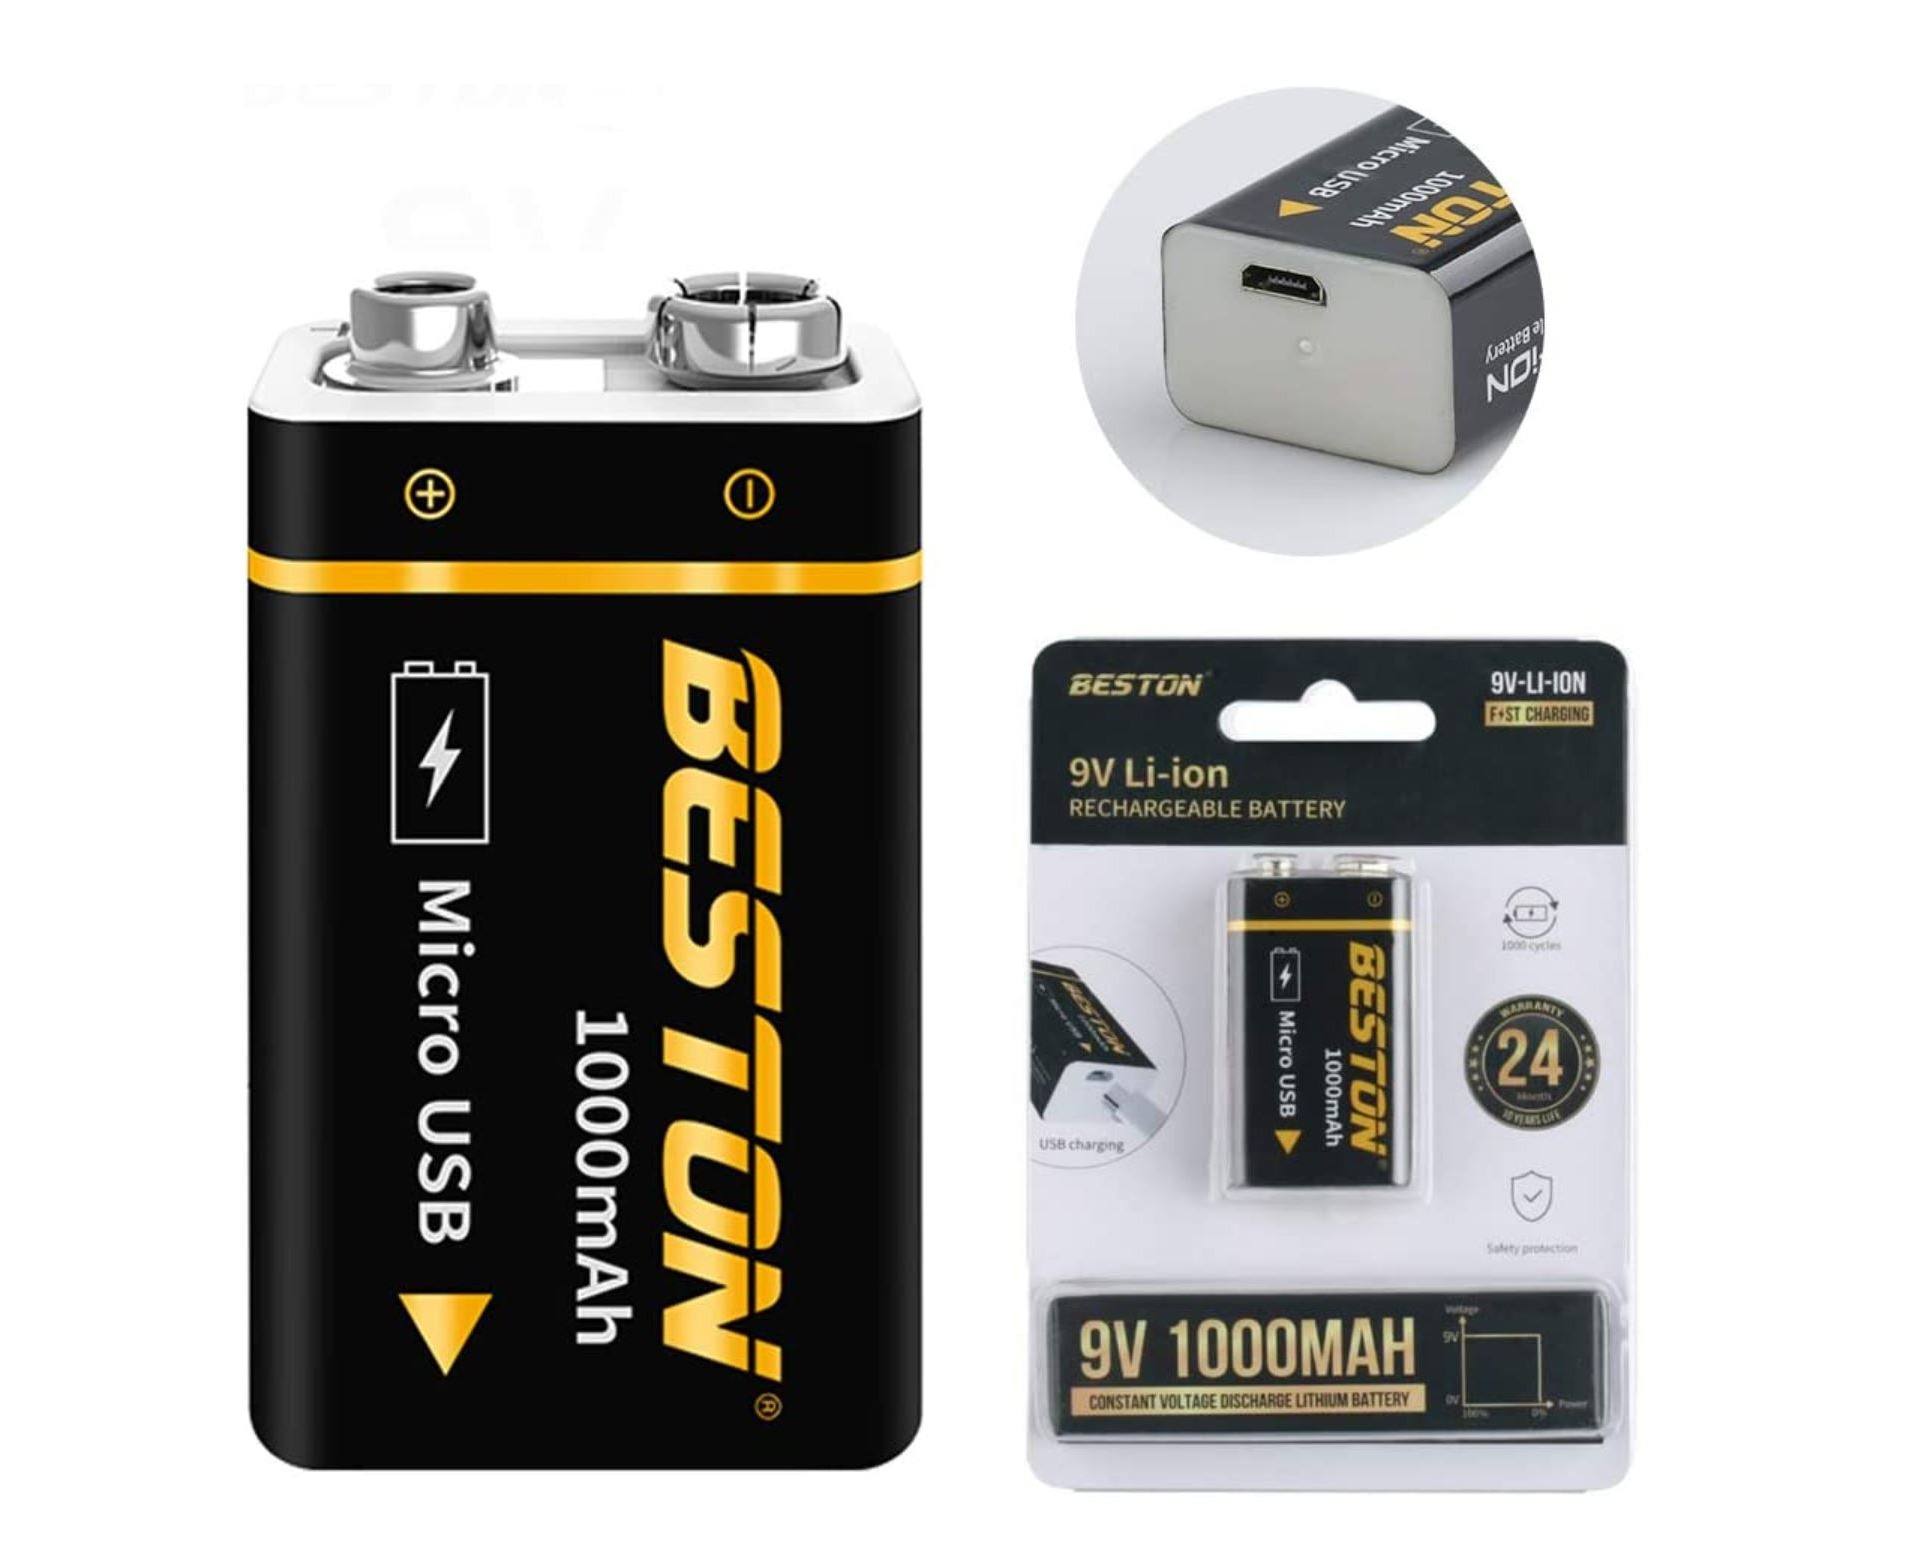 9V Li-ion Rechargeable Battery, 9 Volt/1000mAh(9000mWh) Long Lasting  Rechargeable Batteries with Micro-USB, 1000 Cycles Charge, 1.5 Hrs Fast  Charging